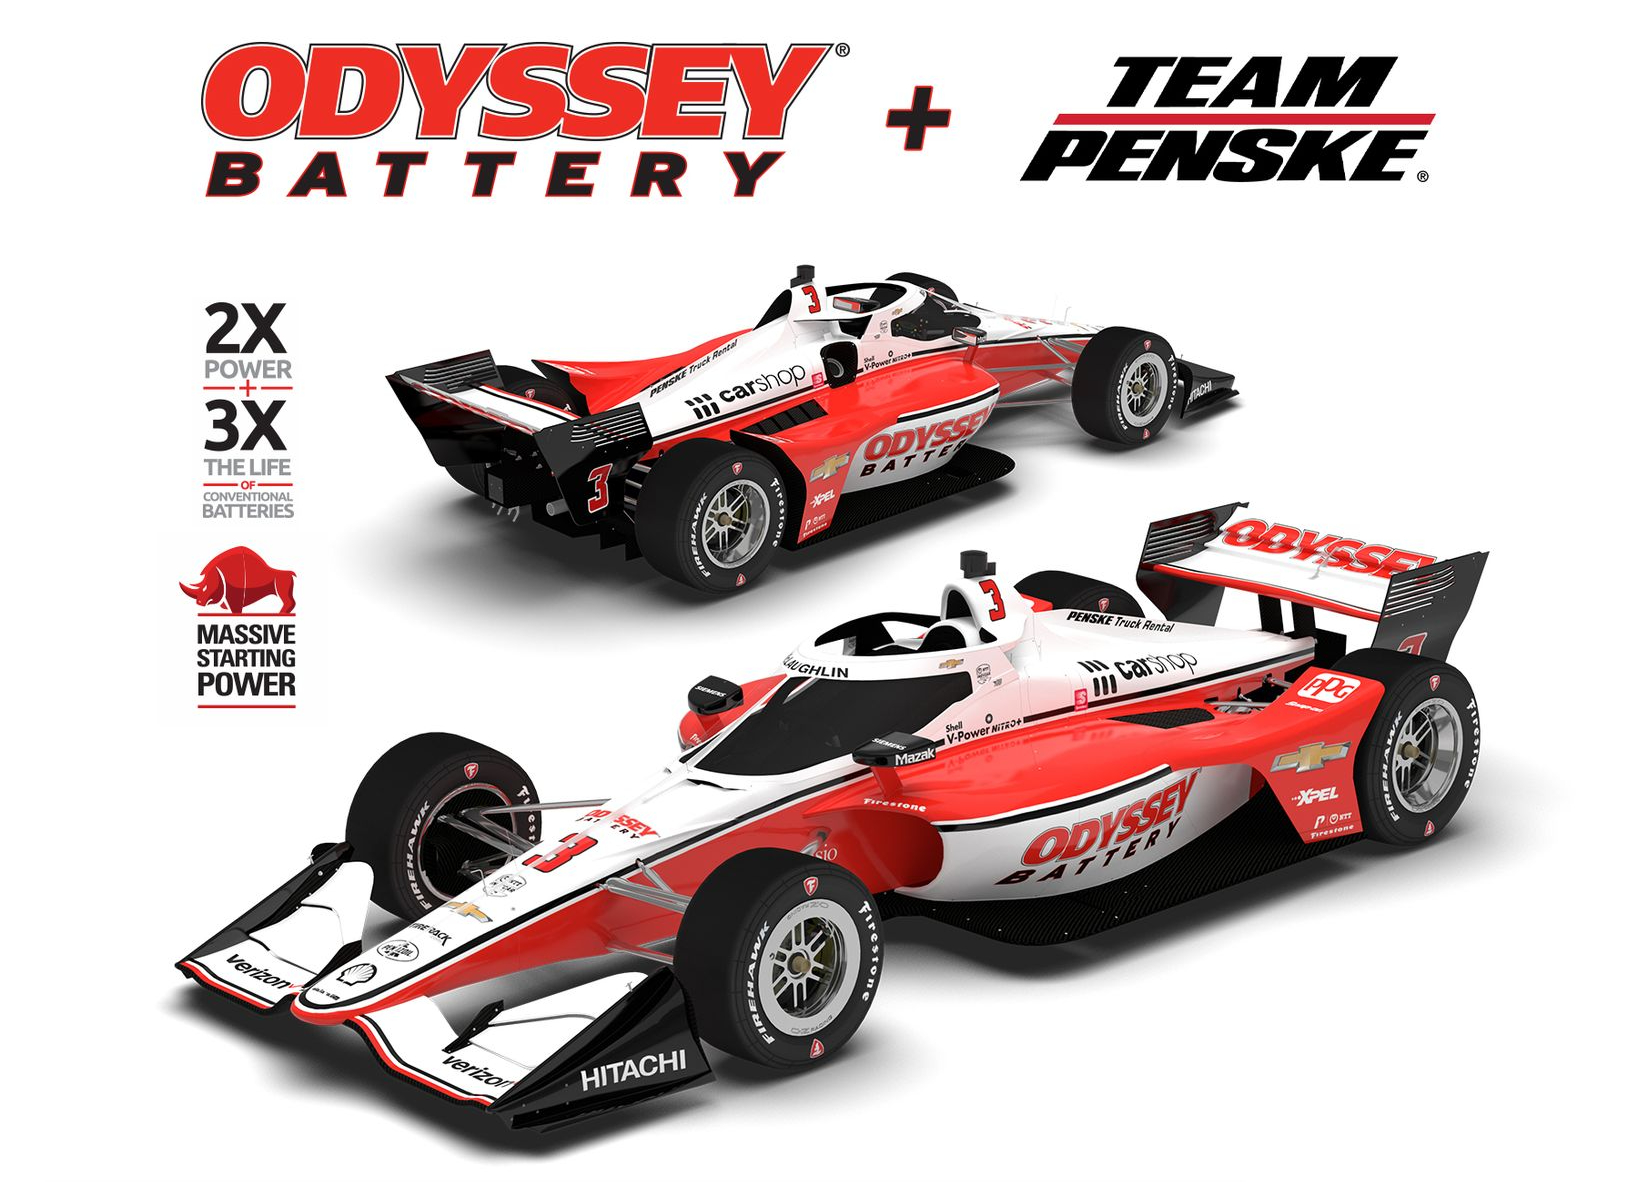 A Team Penske IndyCar with the Odyssey Battery logo on the sidepods